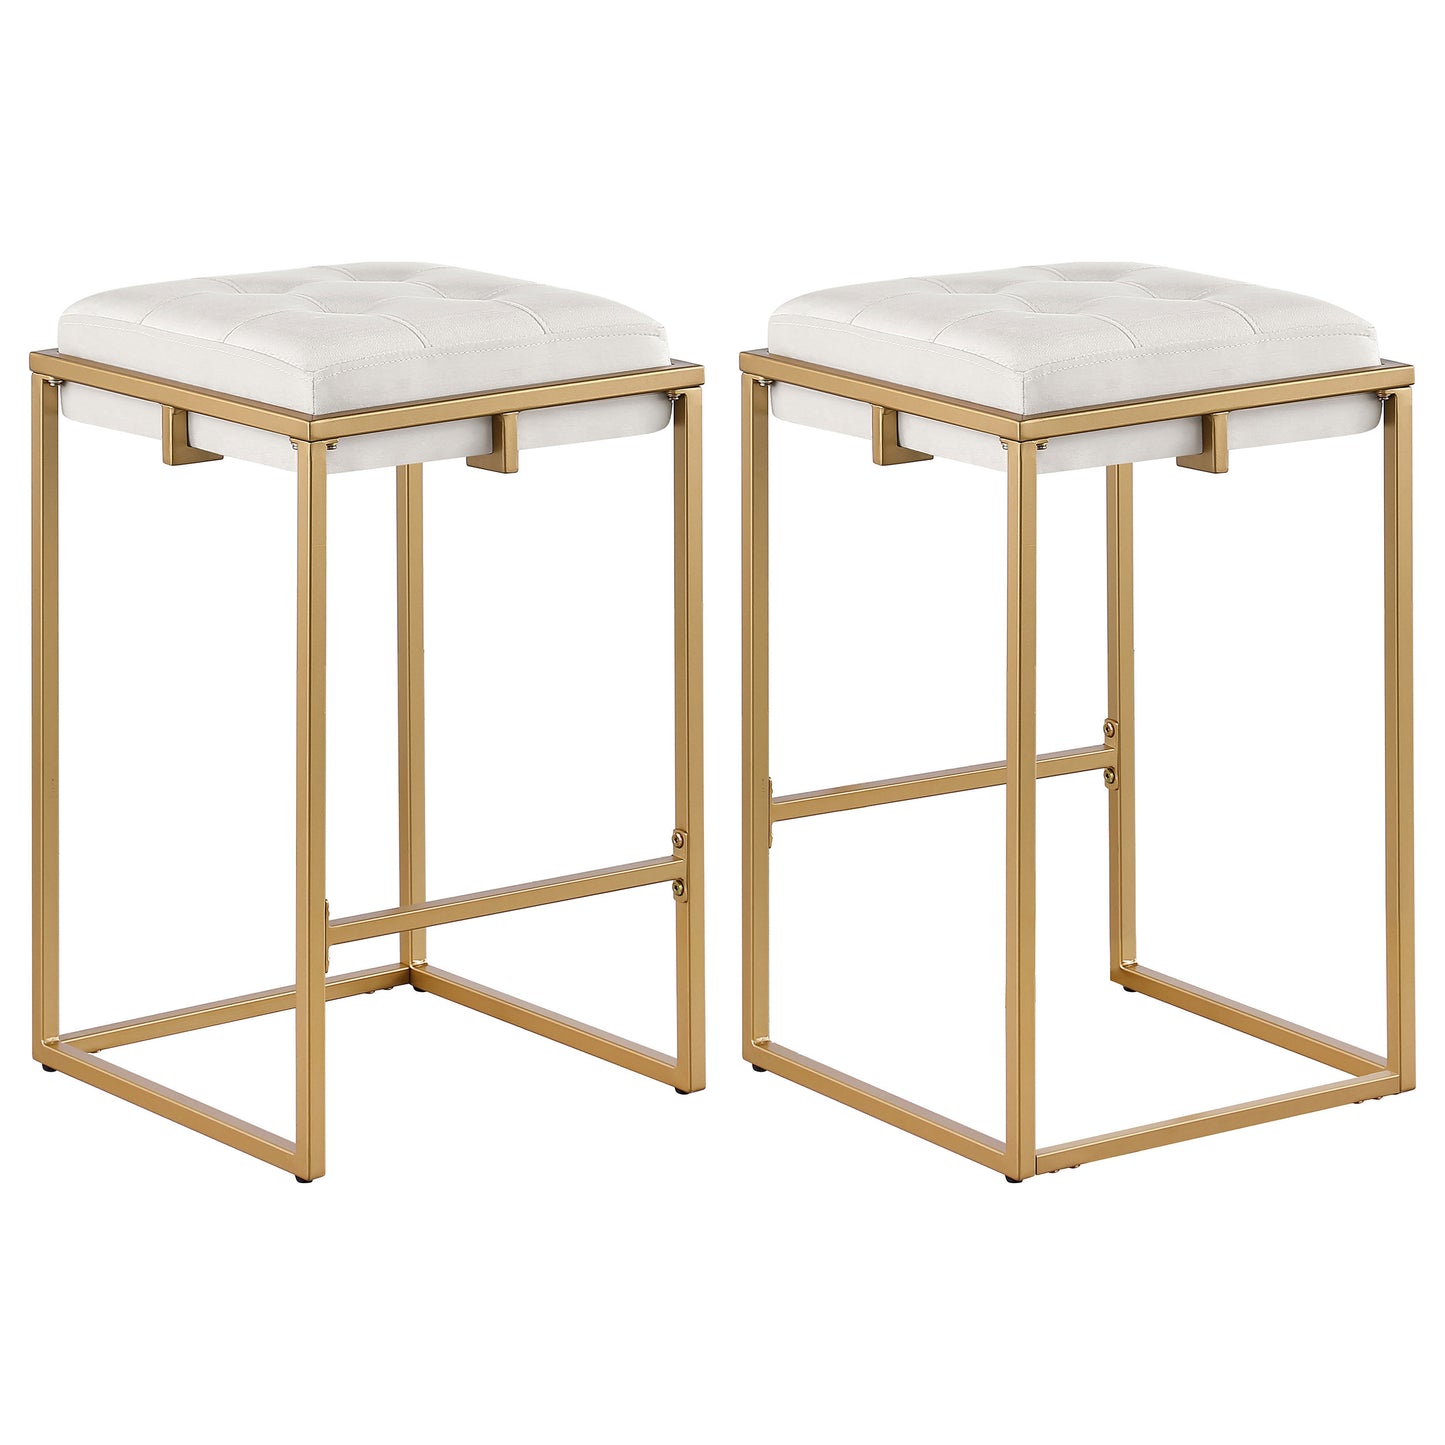 Nadia Square Padded Seat Counter Height Stool (Set of 2) Beige and Gold